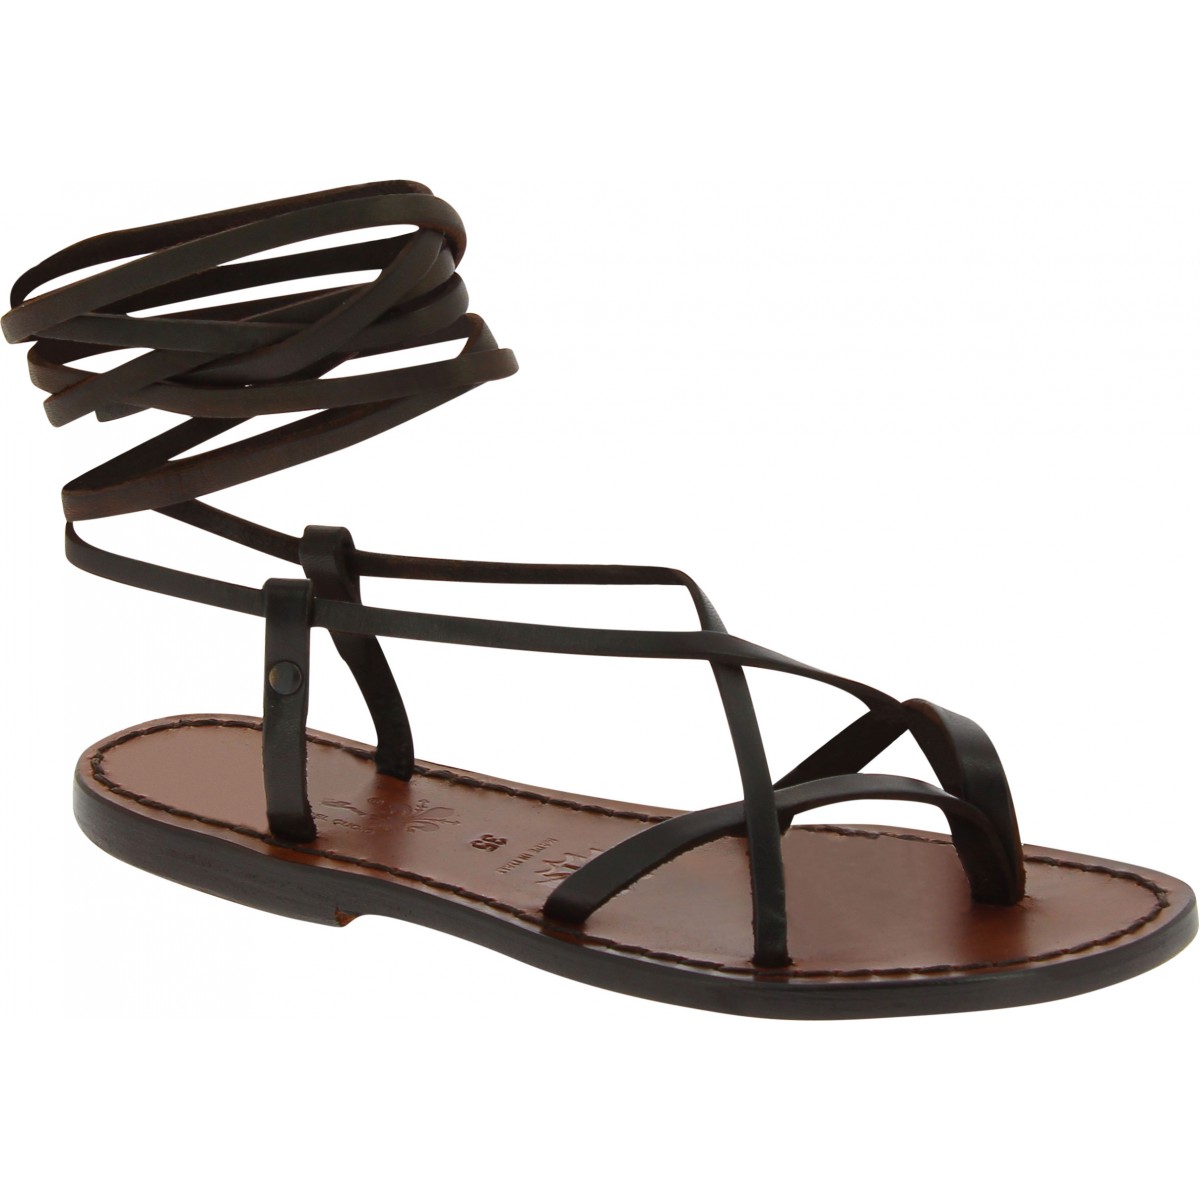 Leather sandals, Flat sandals, Strappy sandals